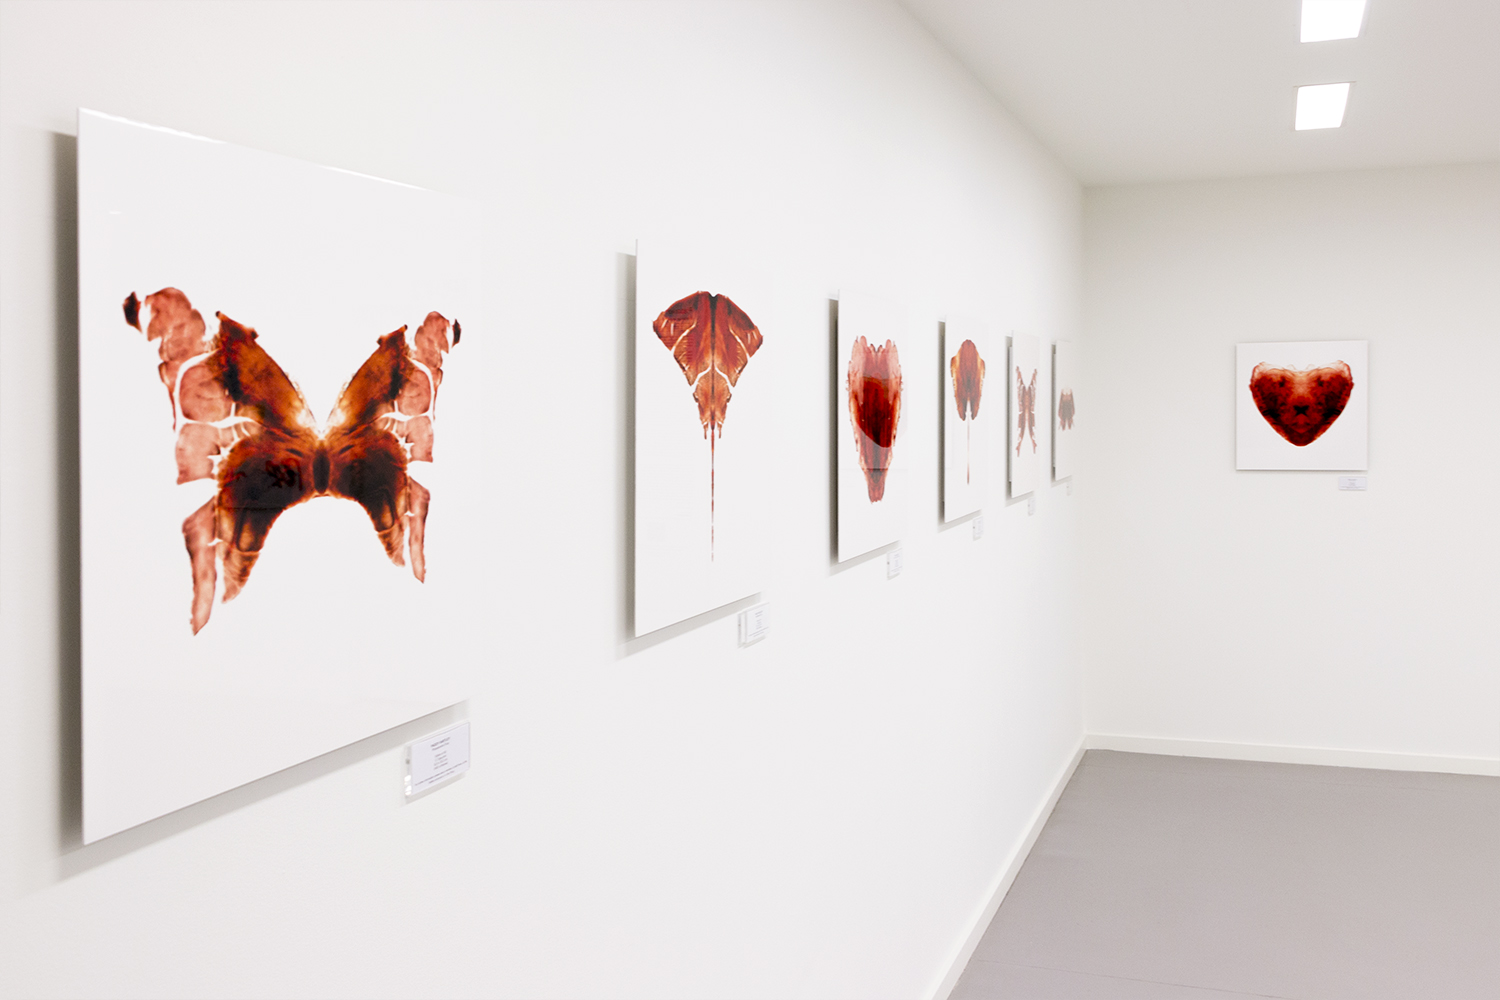  Saatchi Gallery, London  The Aligera Series 1.&nbsp;Lambs Heart tissue compositions. Limited edition C-Type prints.&nbsp; 